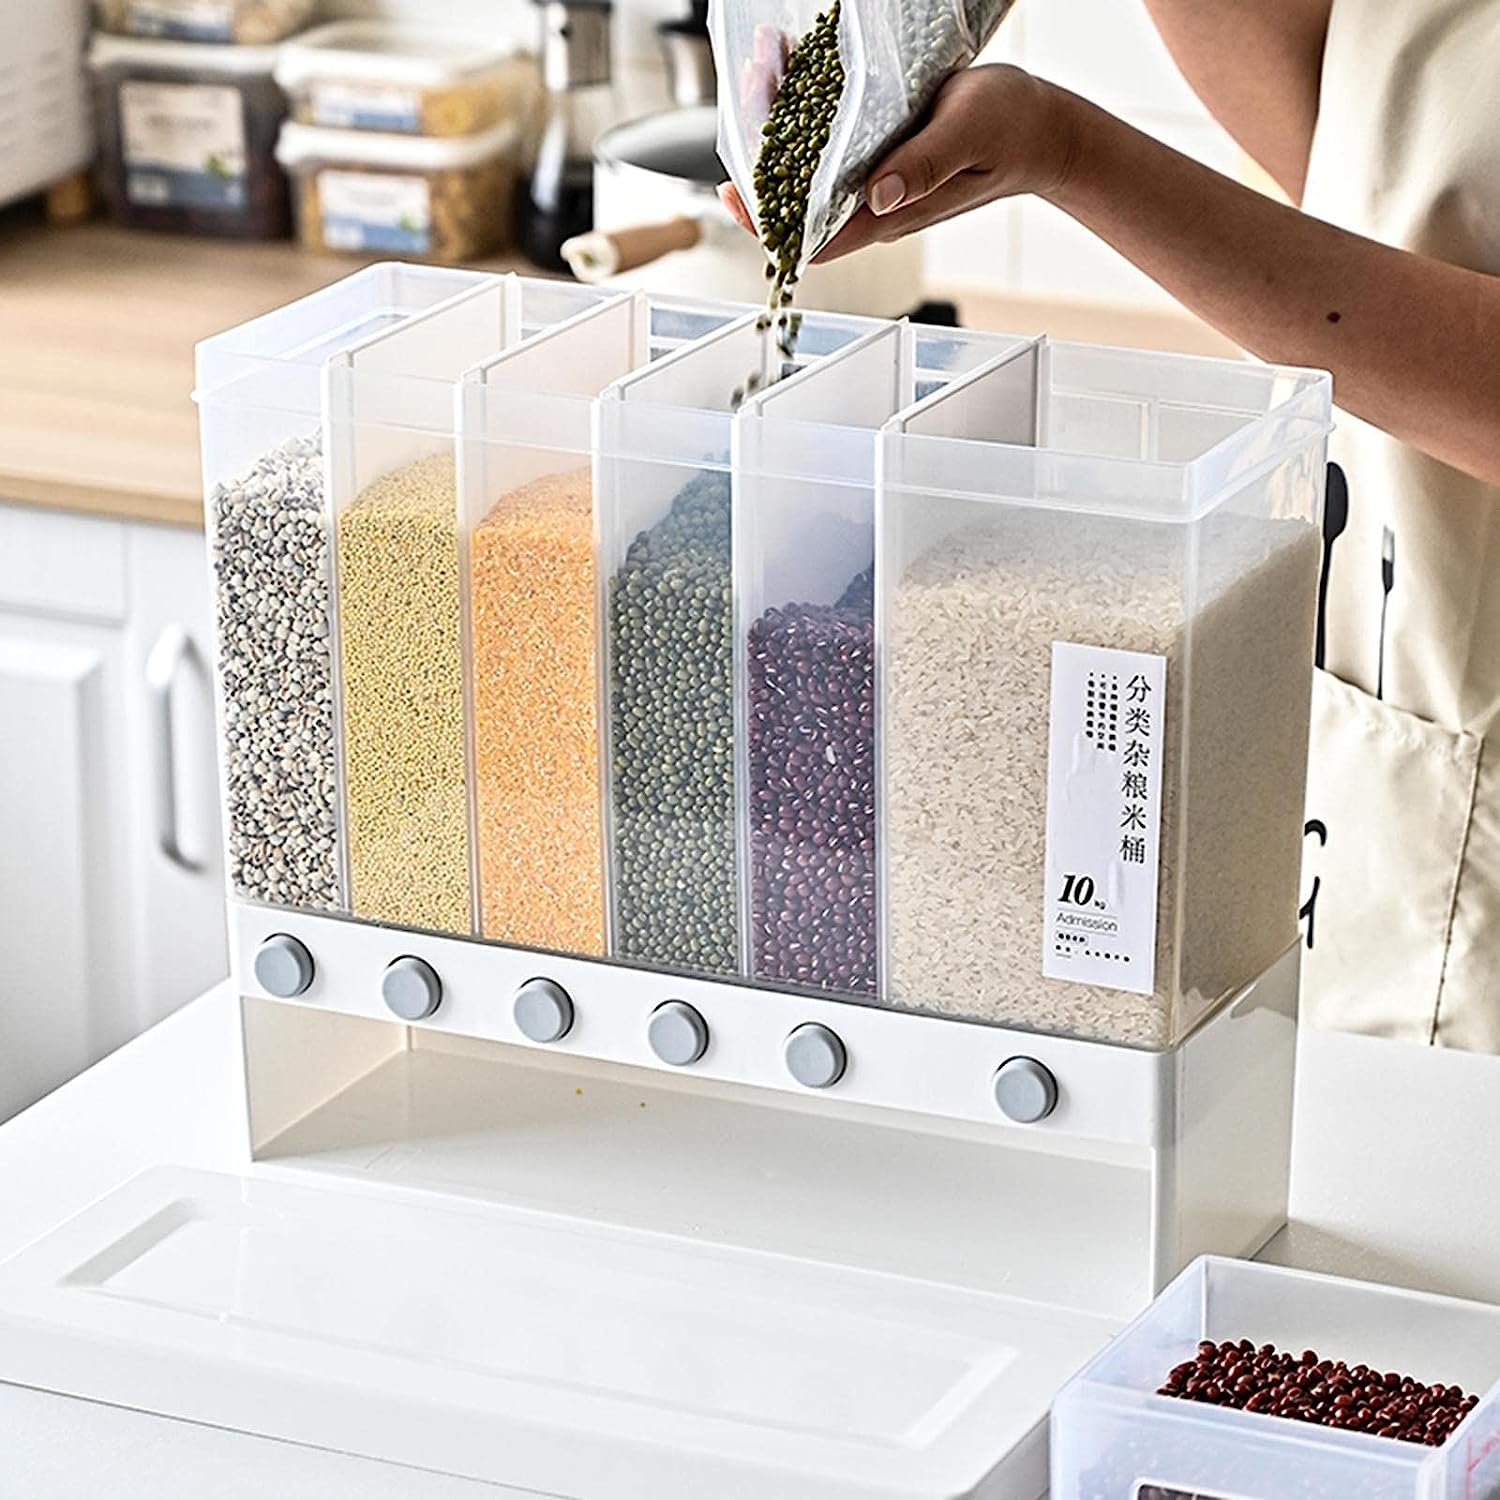 Kitchen Storage Organiser with Multiple Grain Dispensers | Wall Mounted | HK0001